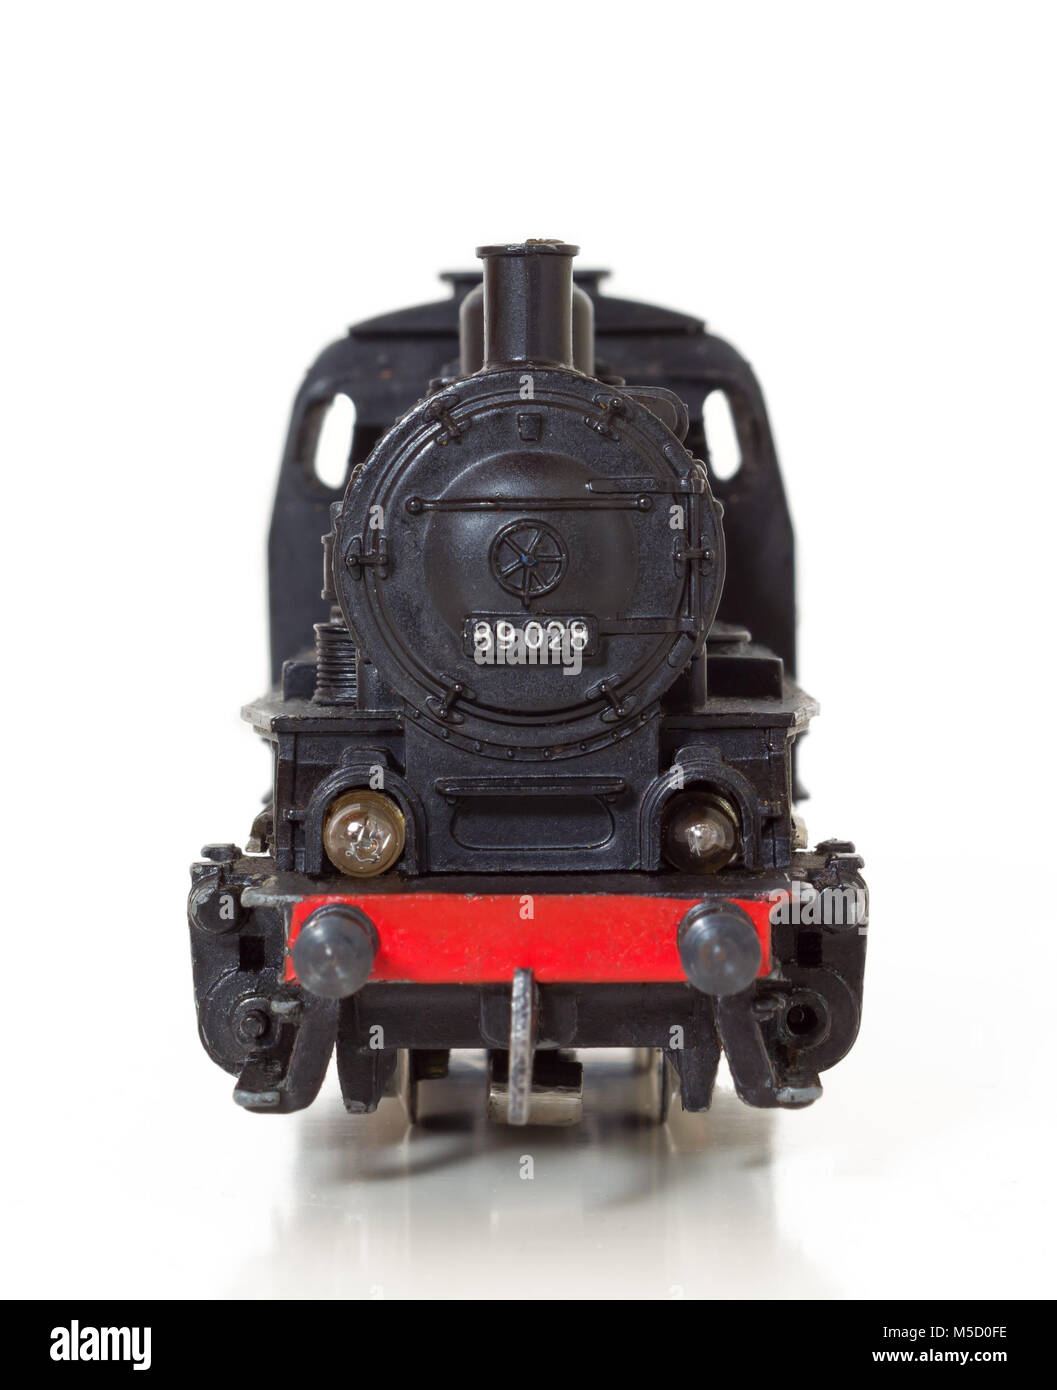 Front view of a 1950s vintage model steam locomotive Stock Photo